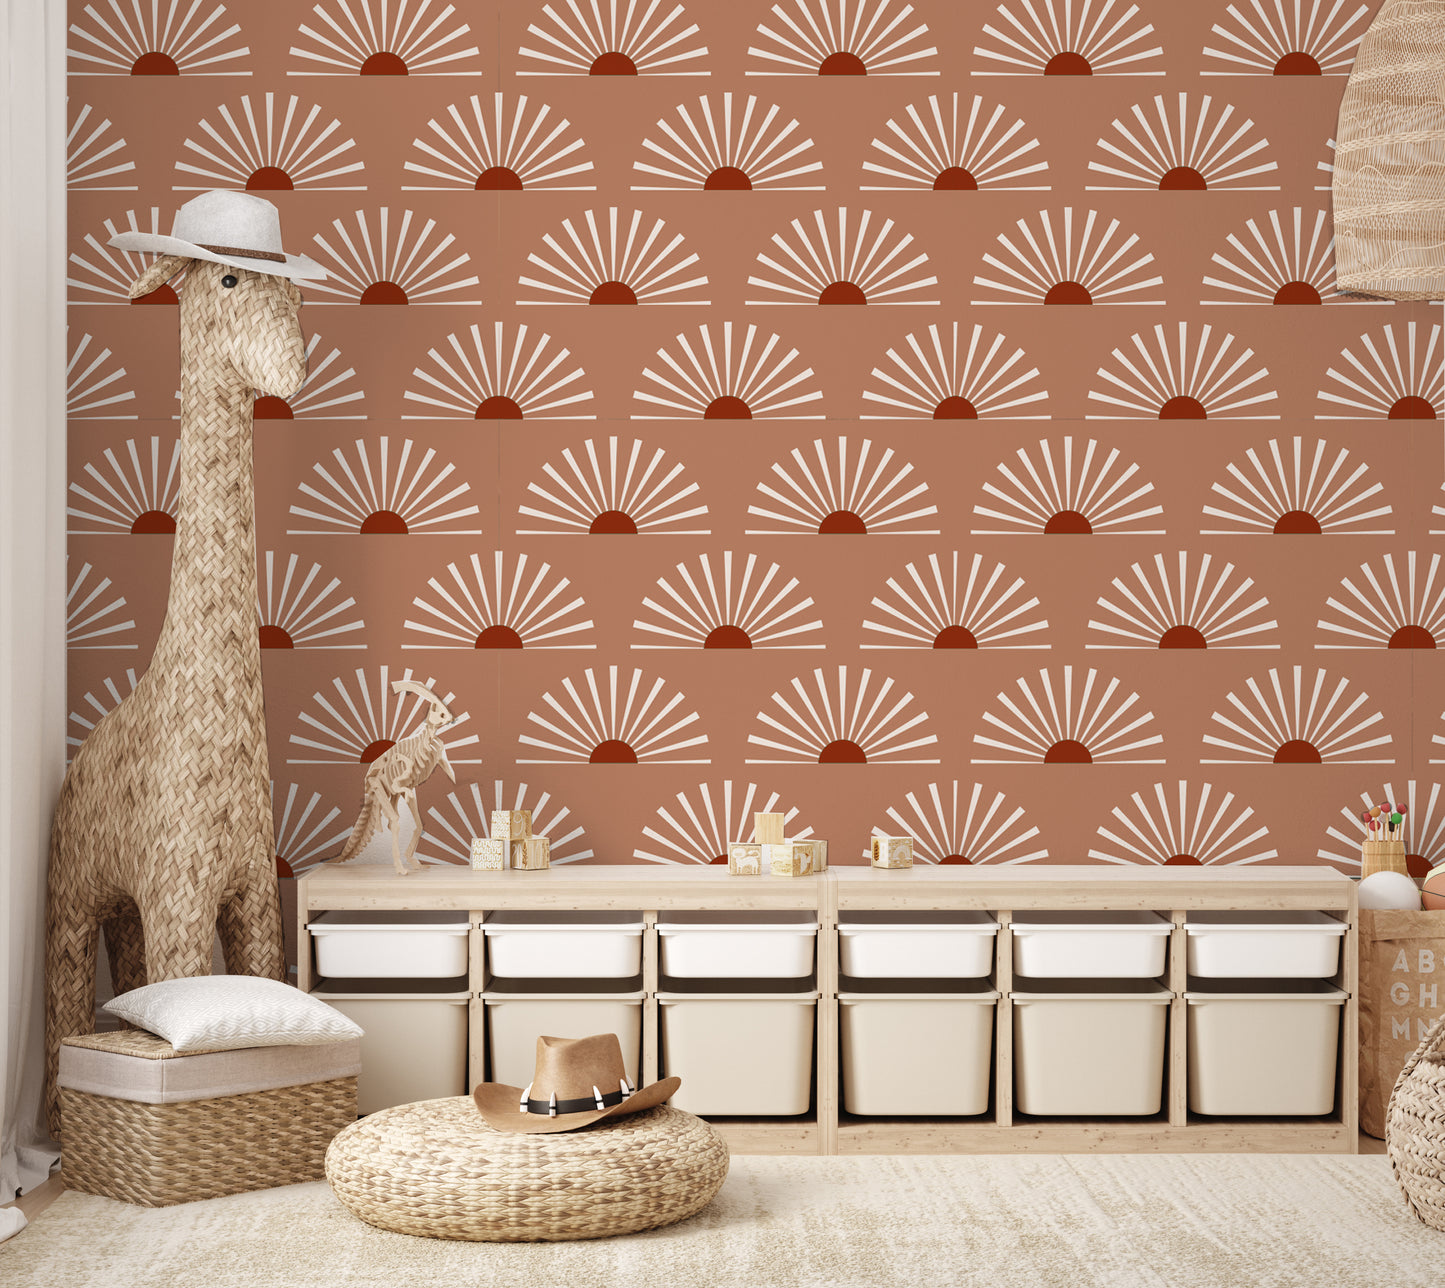 Boho Sunset Removable Peel And Stick Wallpaper